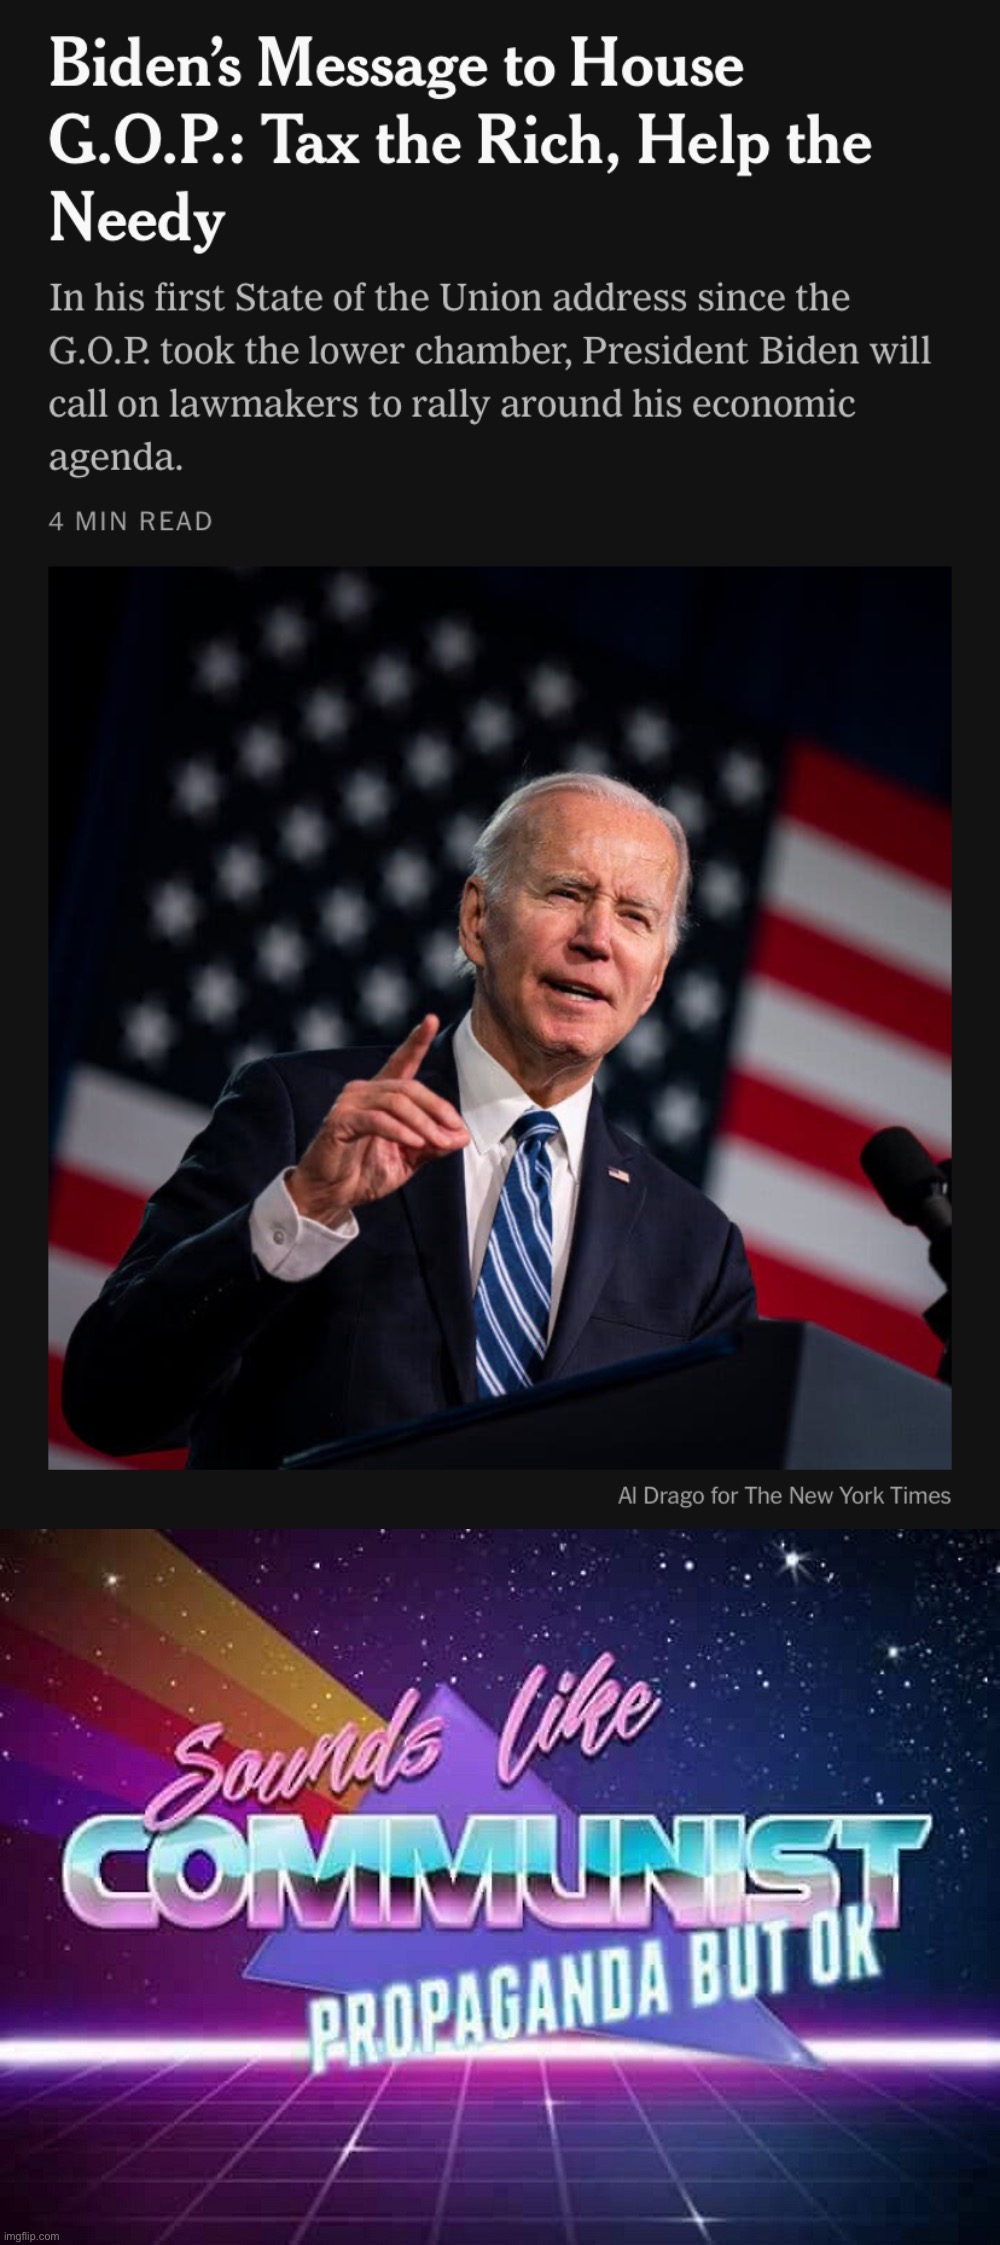 Expect another full-blown Communist speech from Antifa ringleader Biden. Well, voters already rejected that, so try again, buddy | image tagged in biden state of the union,sounds like communist propaganda,biden,commie,crush the commies,elections have consequences | made w/ Imgflip meme maker